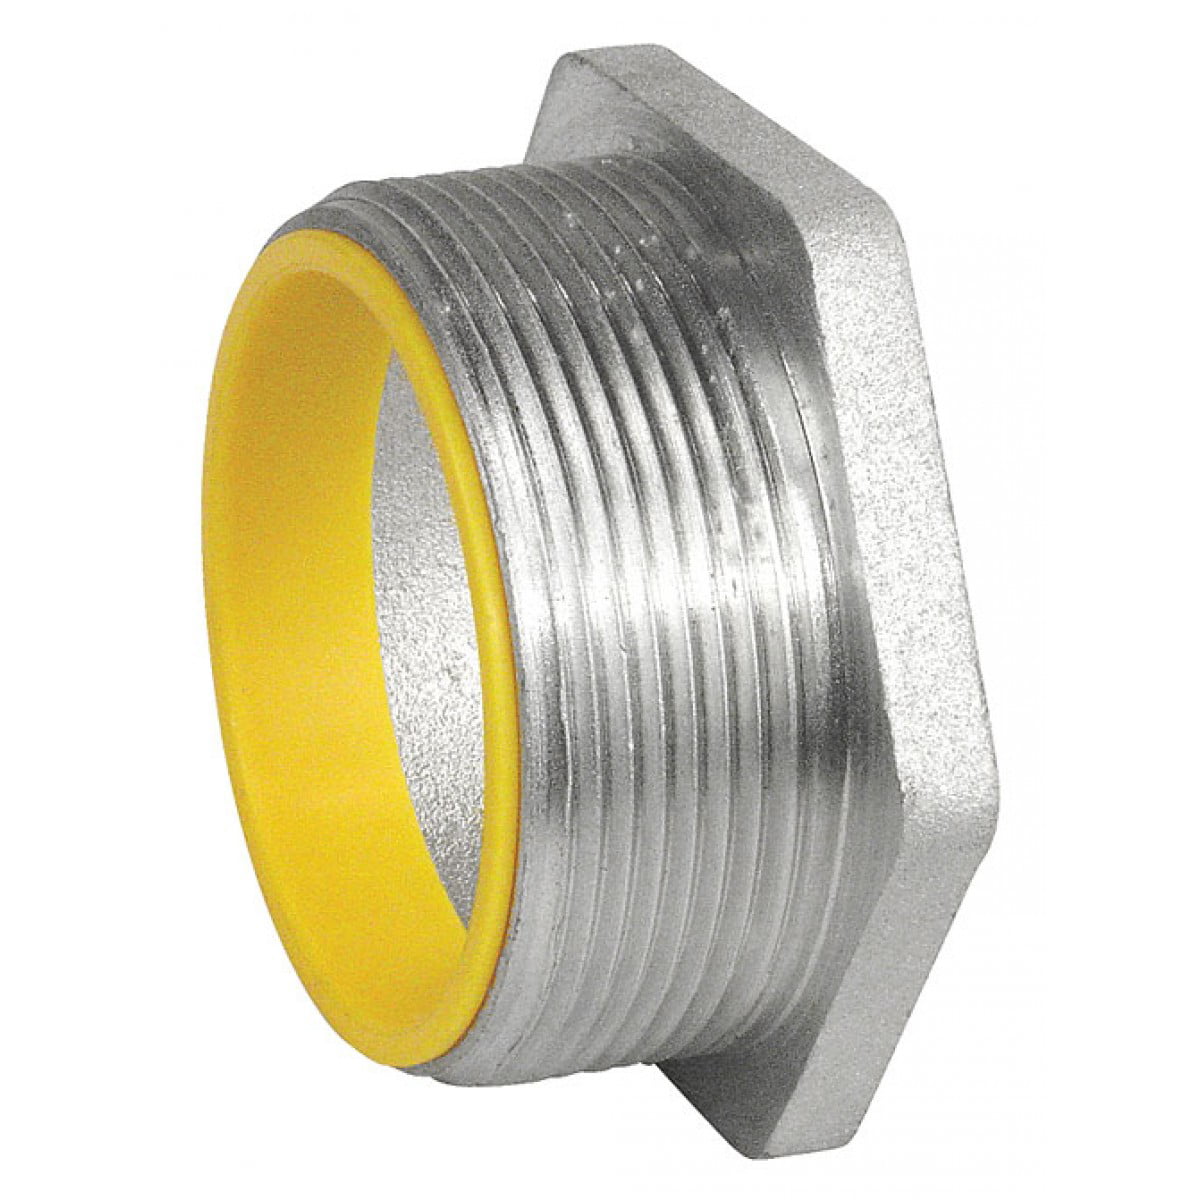 .0625 Crs Galvanized 1 In 10 Pcs Screw/Bar Type Knockout Seal For Standard Air Tight Or Dust Tight Applications Steel